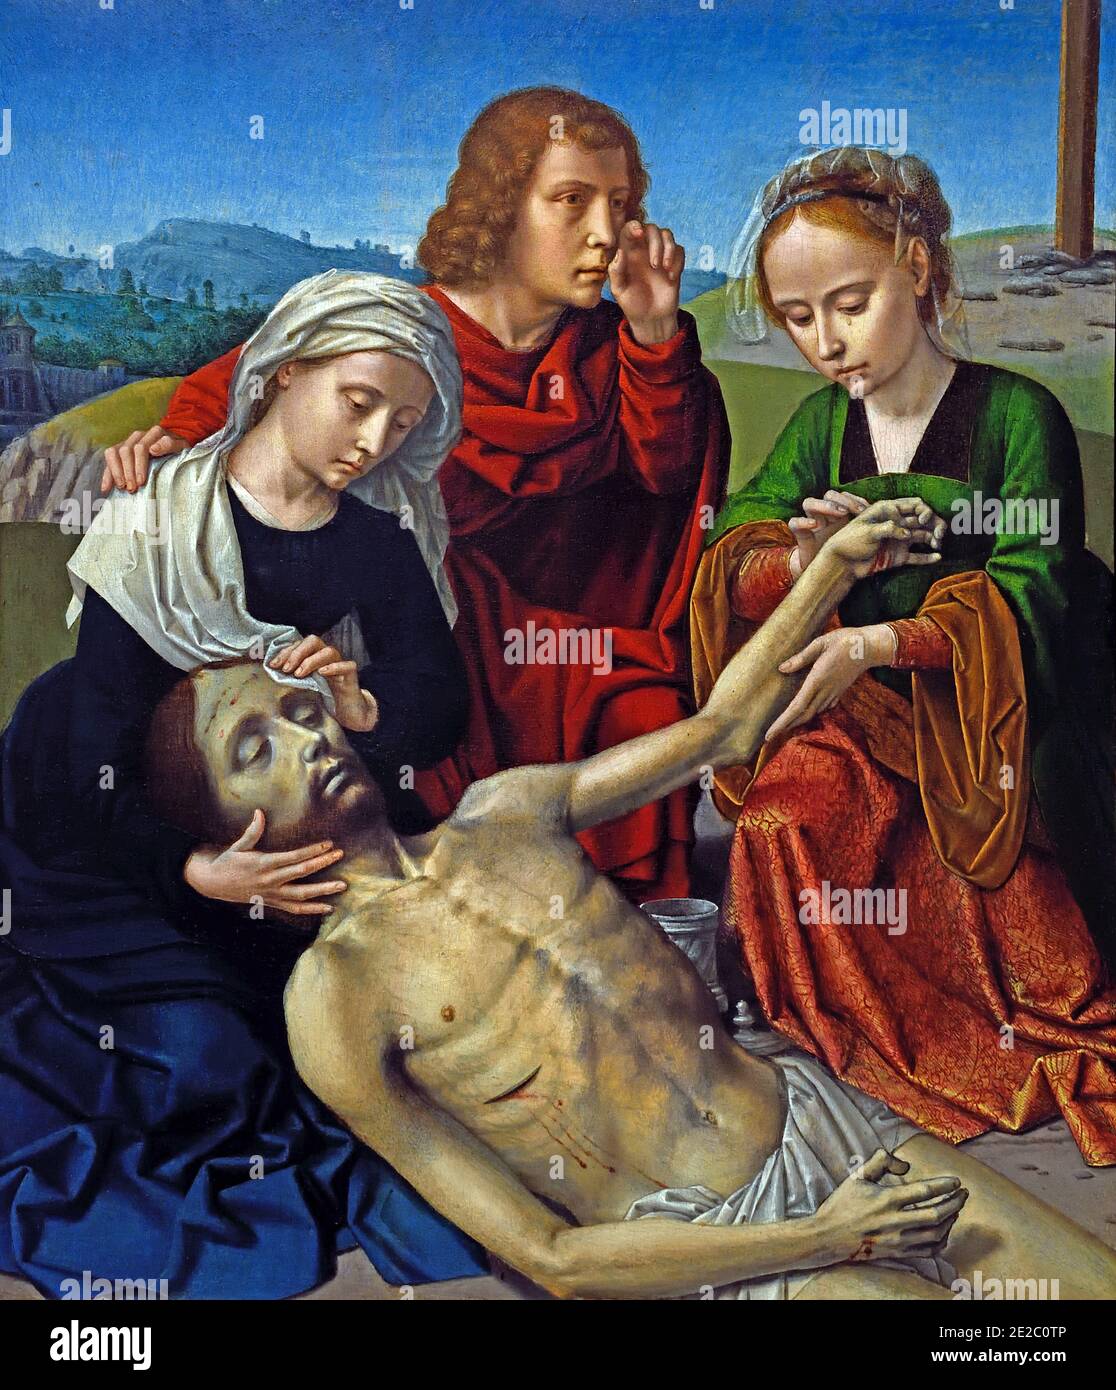 Lamentation 1505 by Gerard DAVID 1450 - 1523 Belgian Belgium Dutch Netherlands Lamentation of Christ, after Jesus was crucified, his body was removed ,from the, cross, his, friends mourned, over his body, Stock Photo